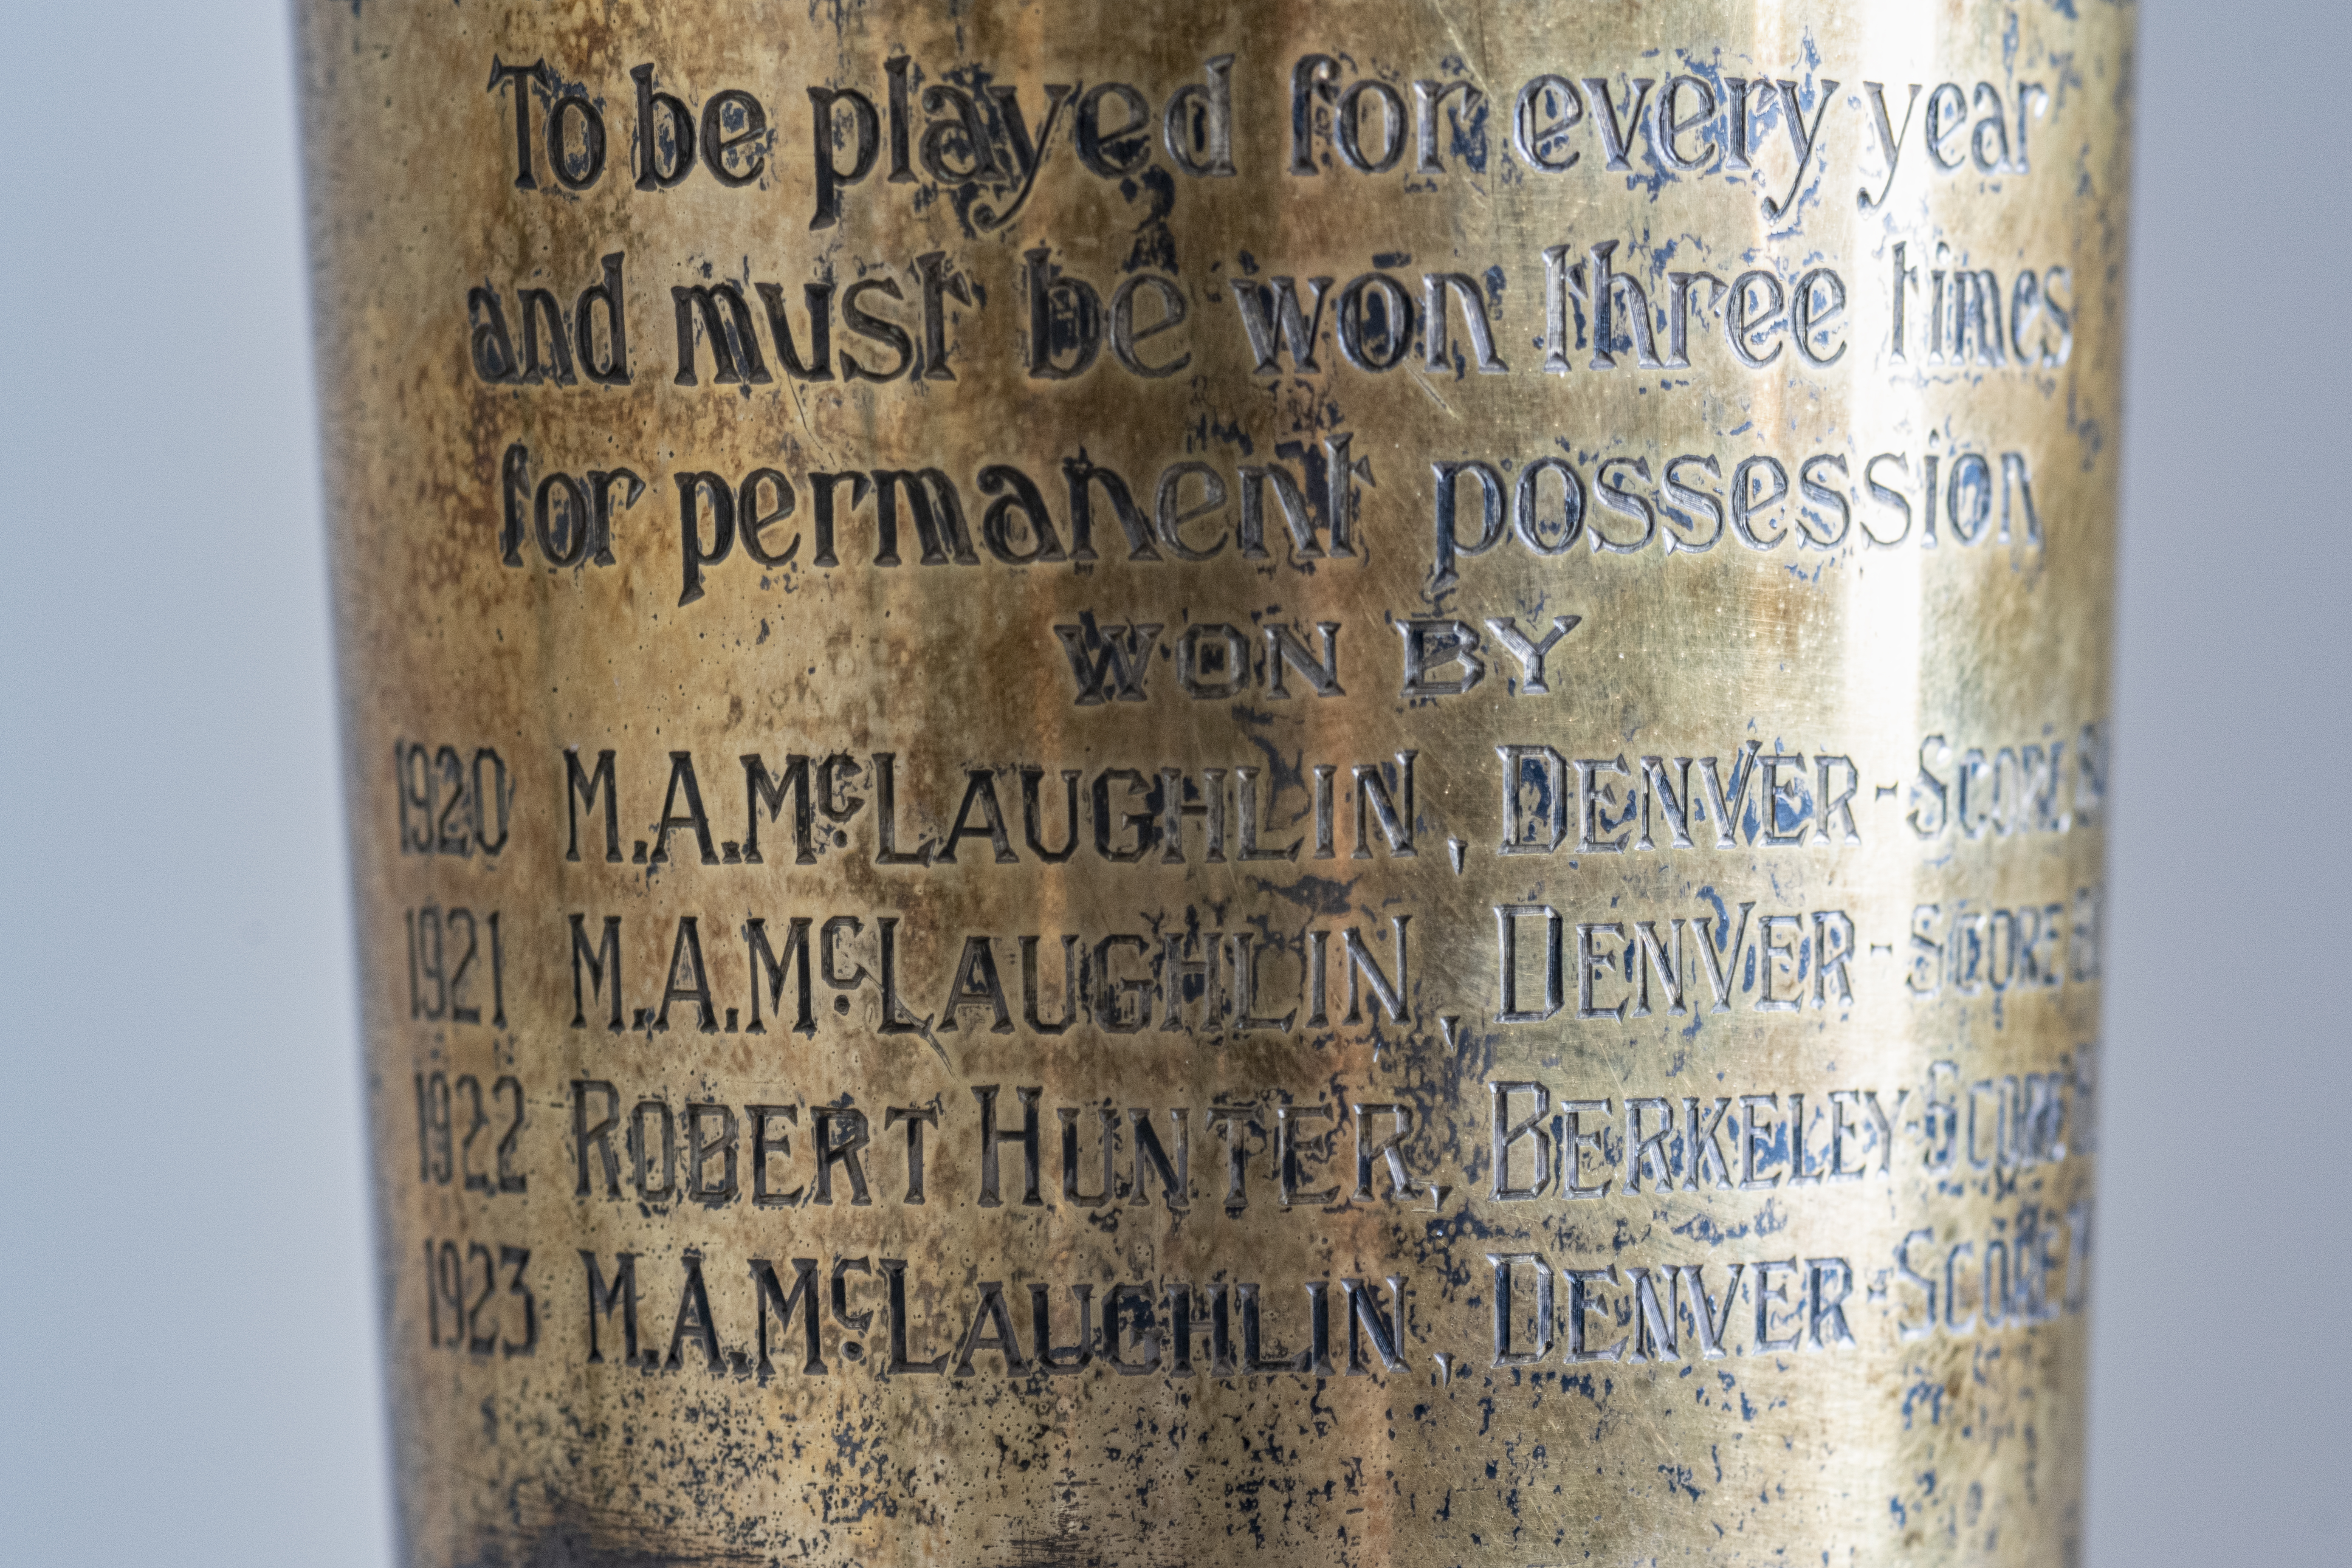 Photo closeup of the inscription on a silver-plated vase that shows some tarnish. The trophy pictured is the original presented to the winner of the Pebble Beach Golf Tournament, which began in 1920. The inscription shows that M.A.McLaughlin won the trophy in 1920, 1921, and 1923. A Robert Hunter won it in 1922.